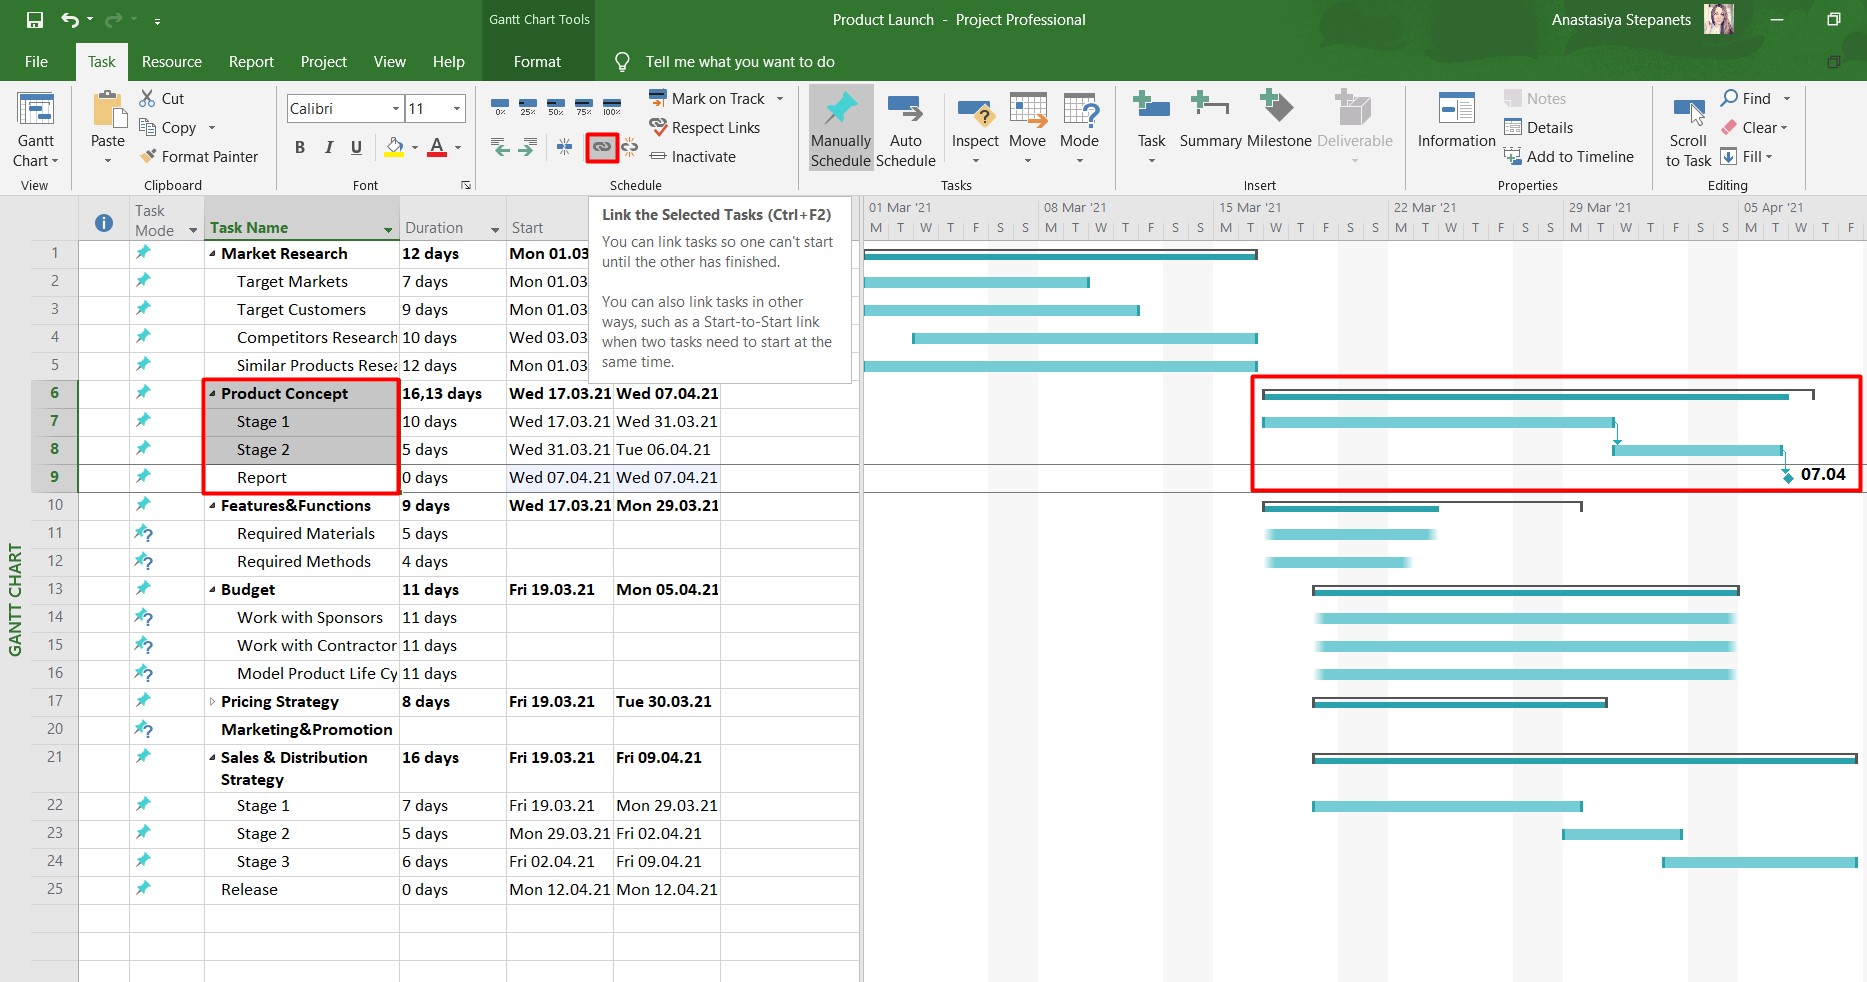 How to create a Gantt chart in MS Project: linking tasks on a Gantt chart